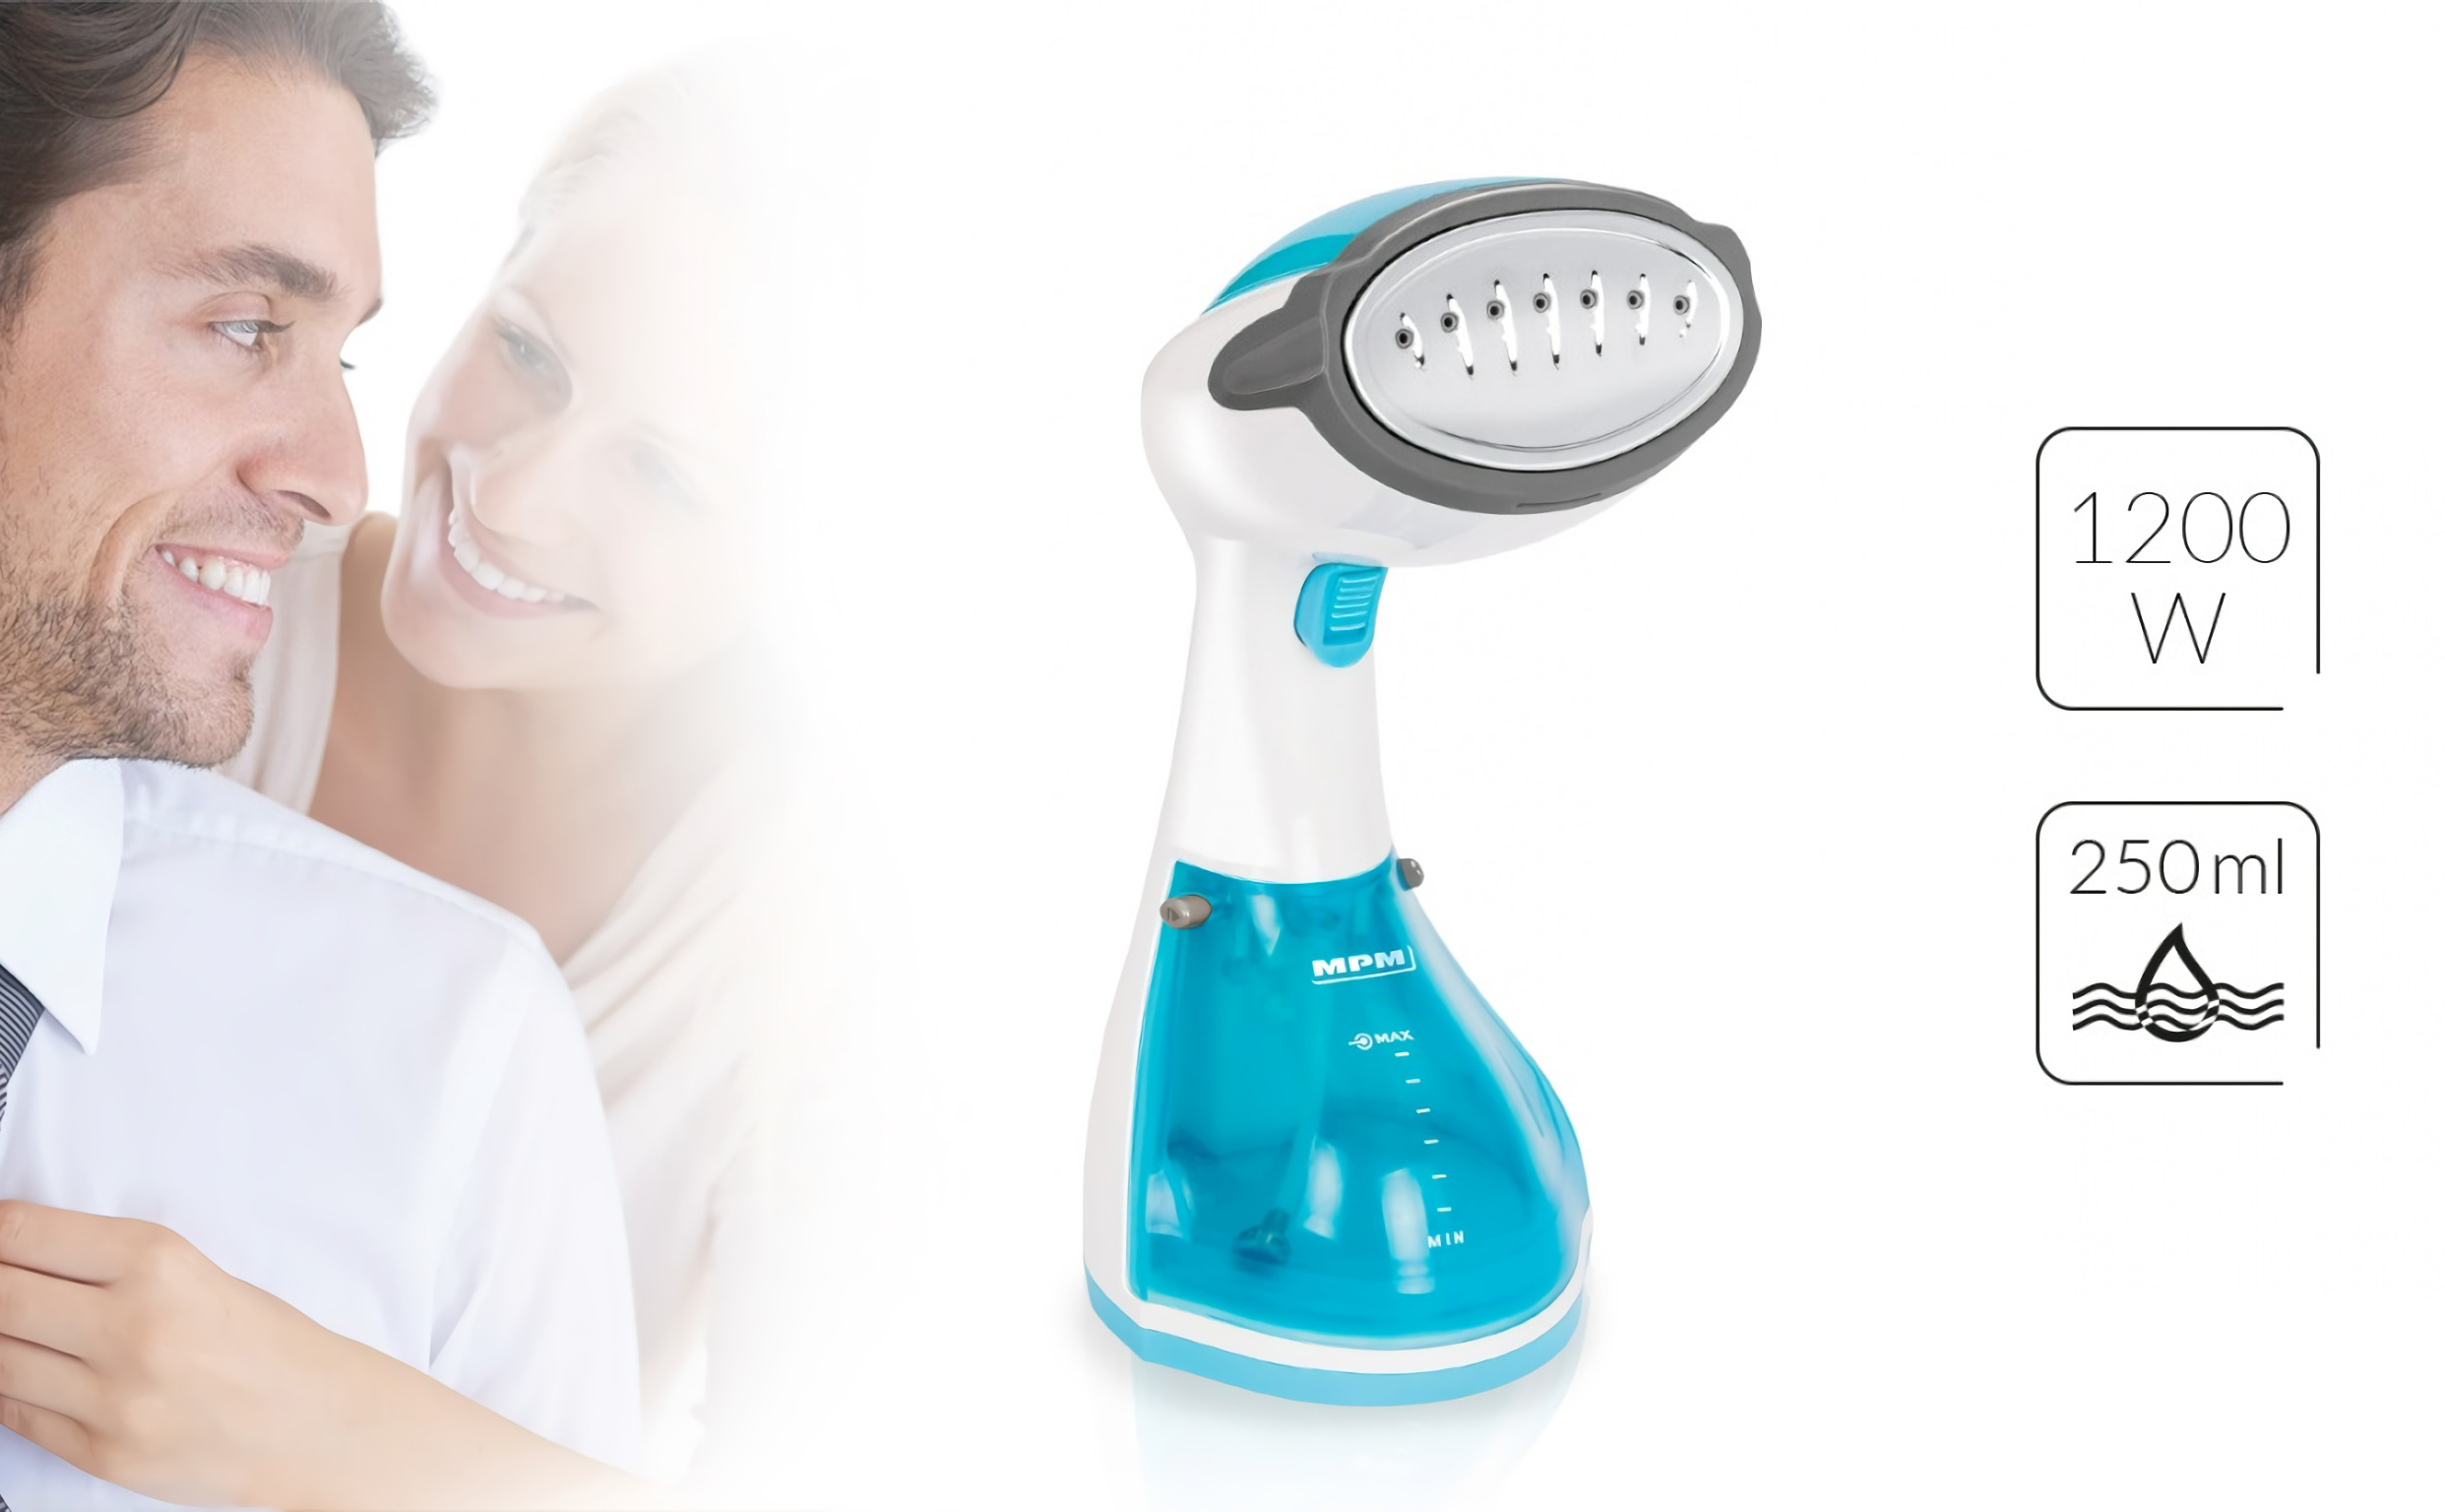 MPM MZP-01 Vertical Steam Iron for the ironing of hanging clothes, curtains, sheets, in horizontal and vertical, steam blow 36gr/min, tank 250ml, generates steam in 30sec